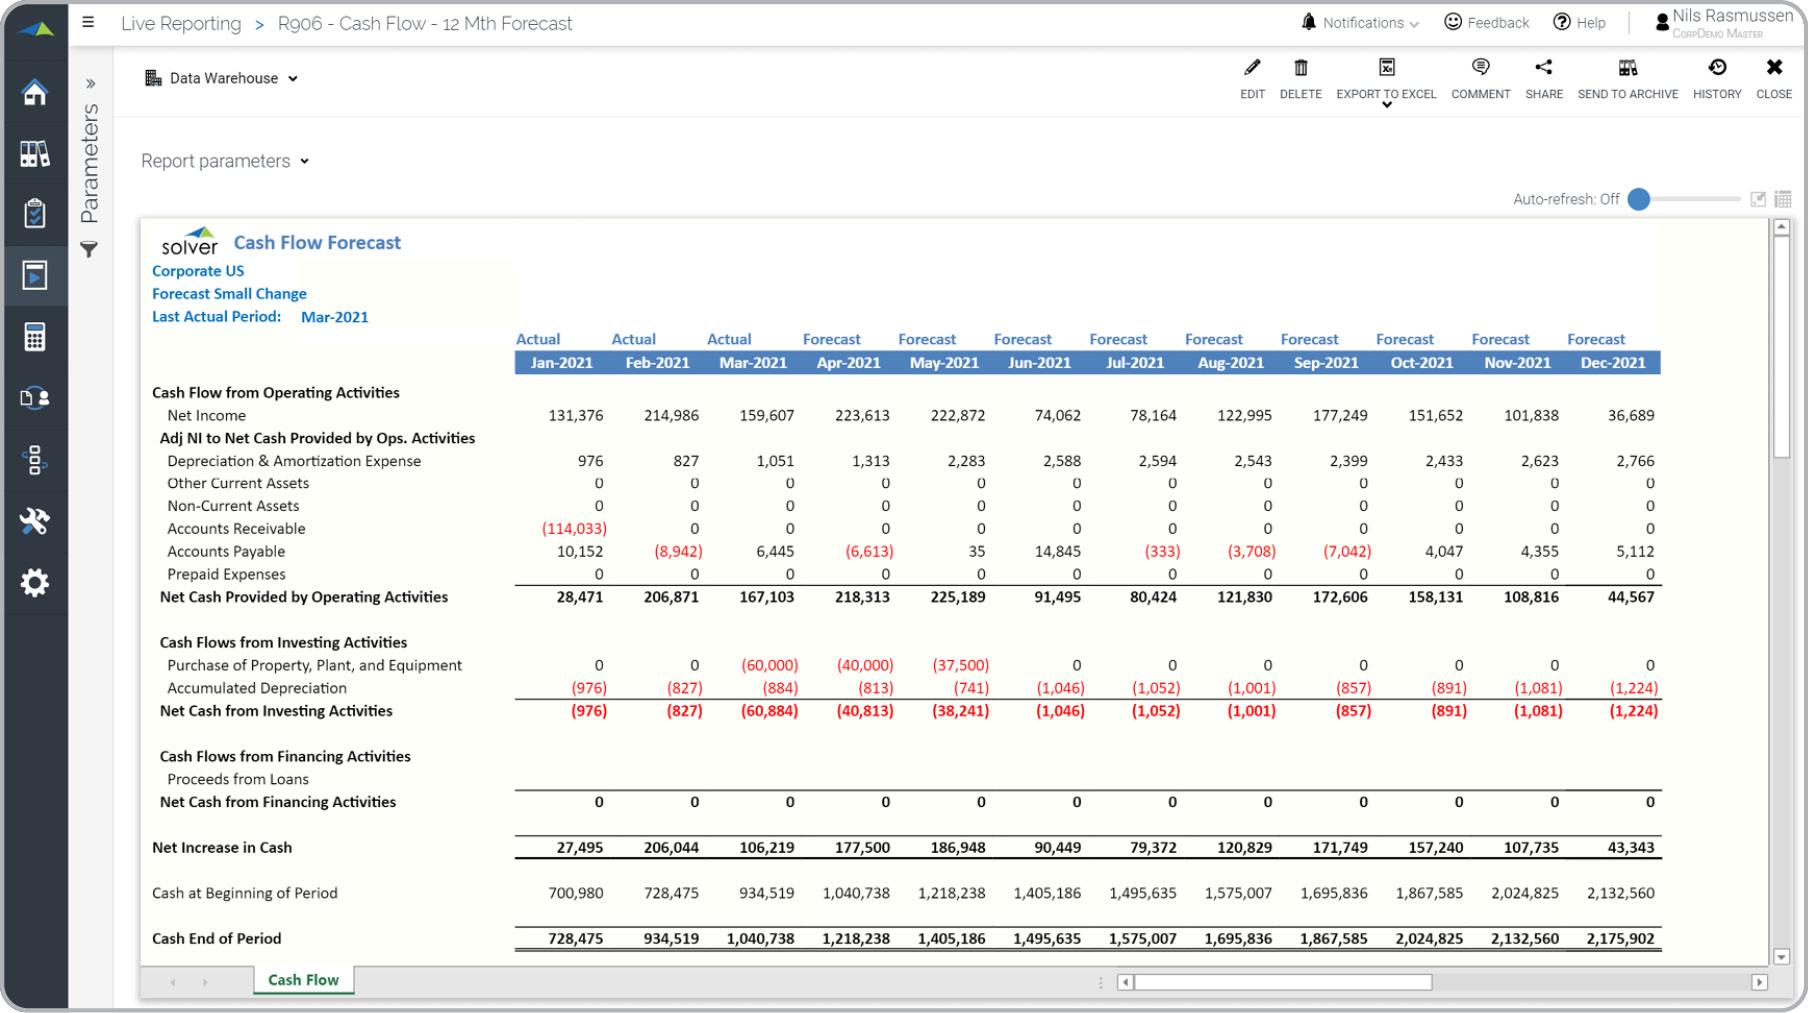 Monthly Cash Flow Forecast Model for Acumatica